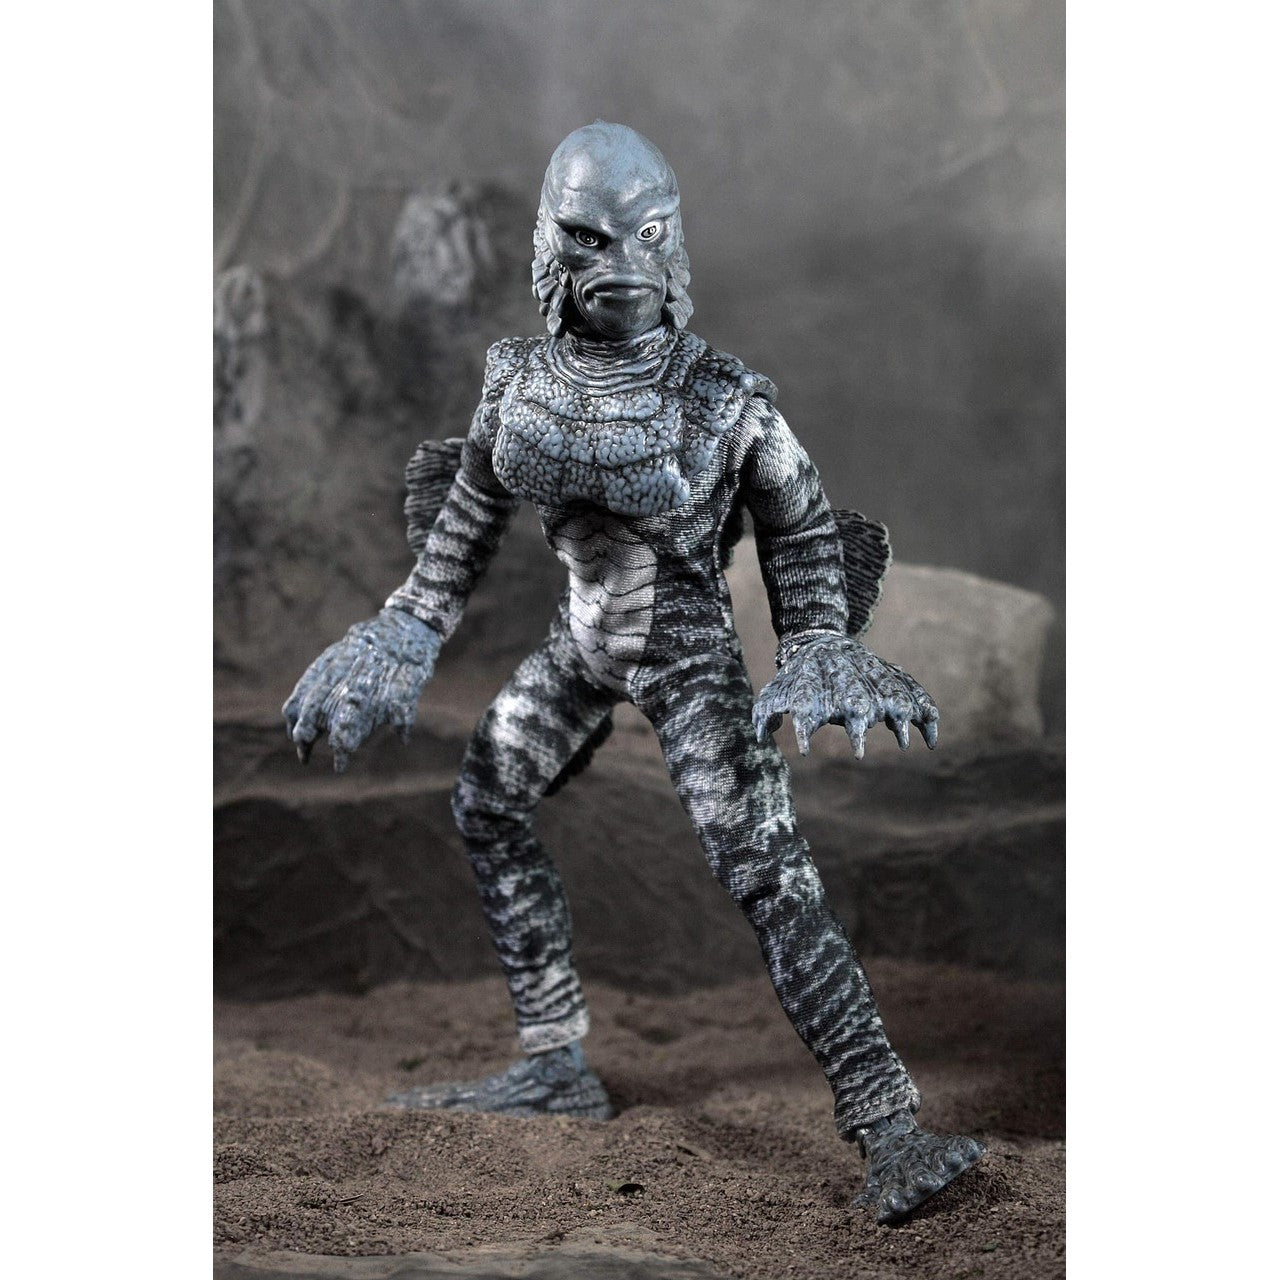 Creature from the Black Lagoon Black and White version 8" Action Figure - Mego - 0